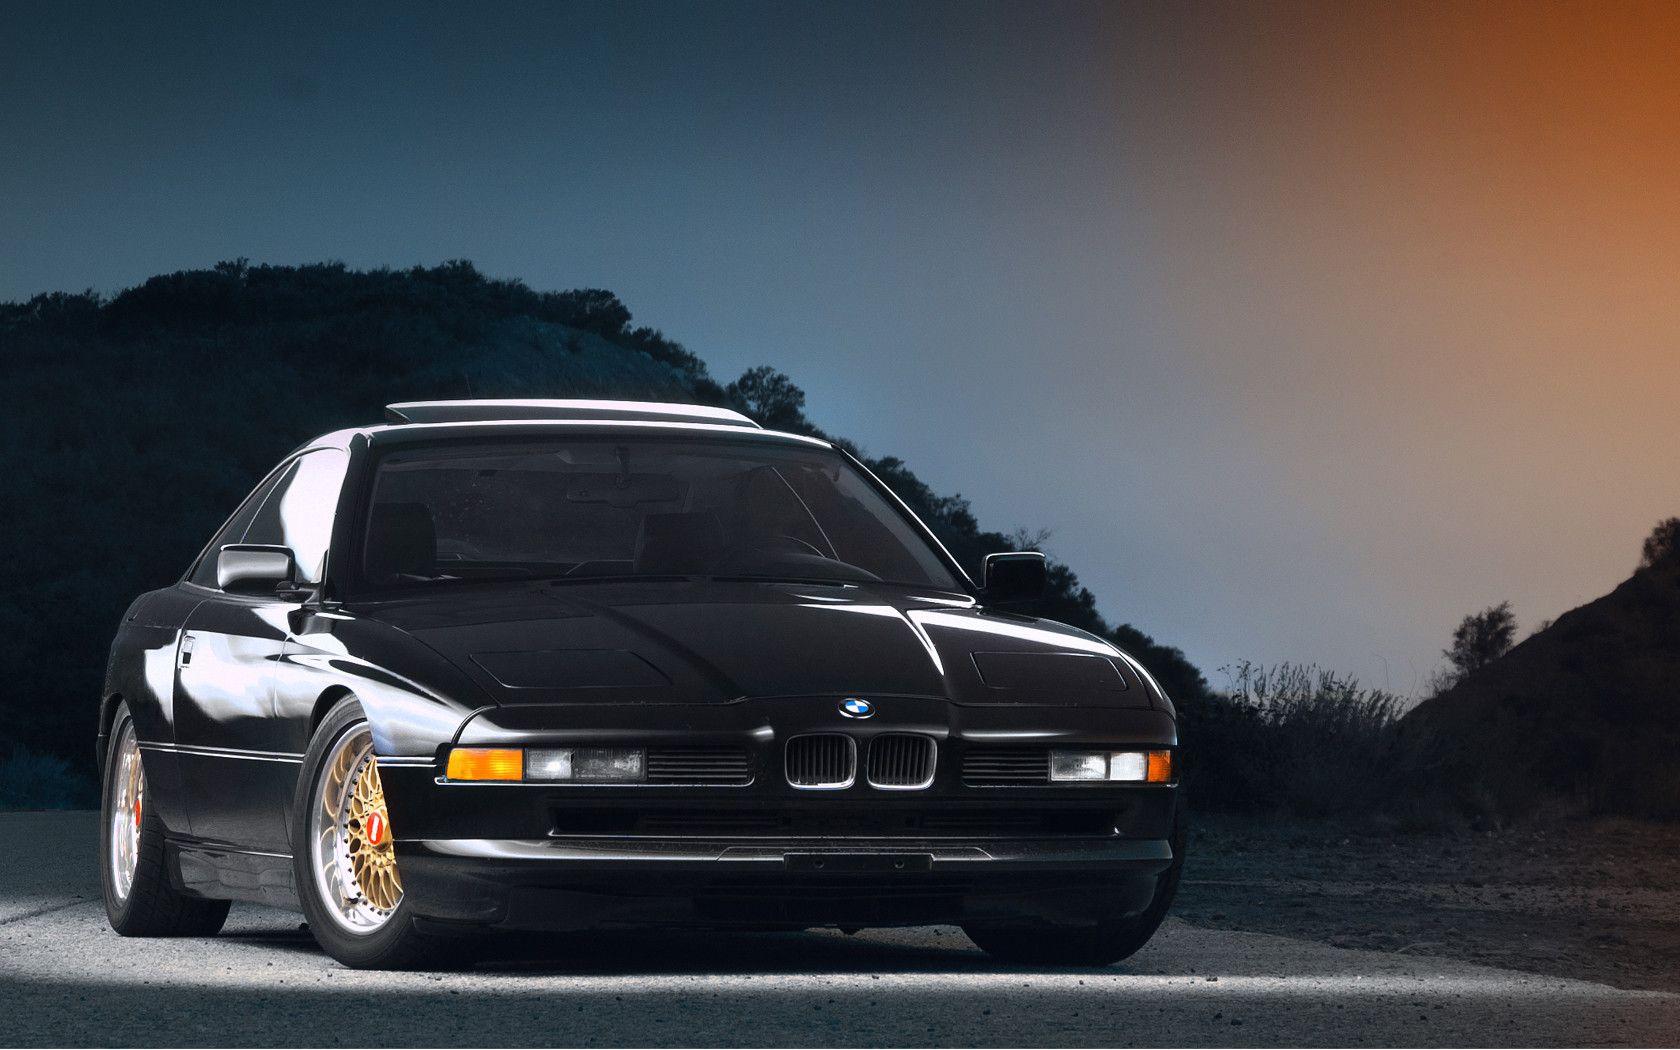 Bmw E31 Wallpapers Top Free Bmw E31 Backgrounds Wallpaperaccess